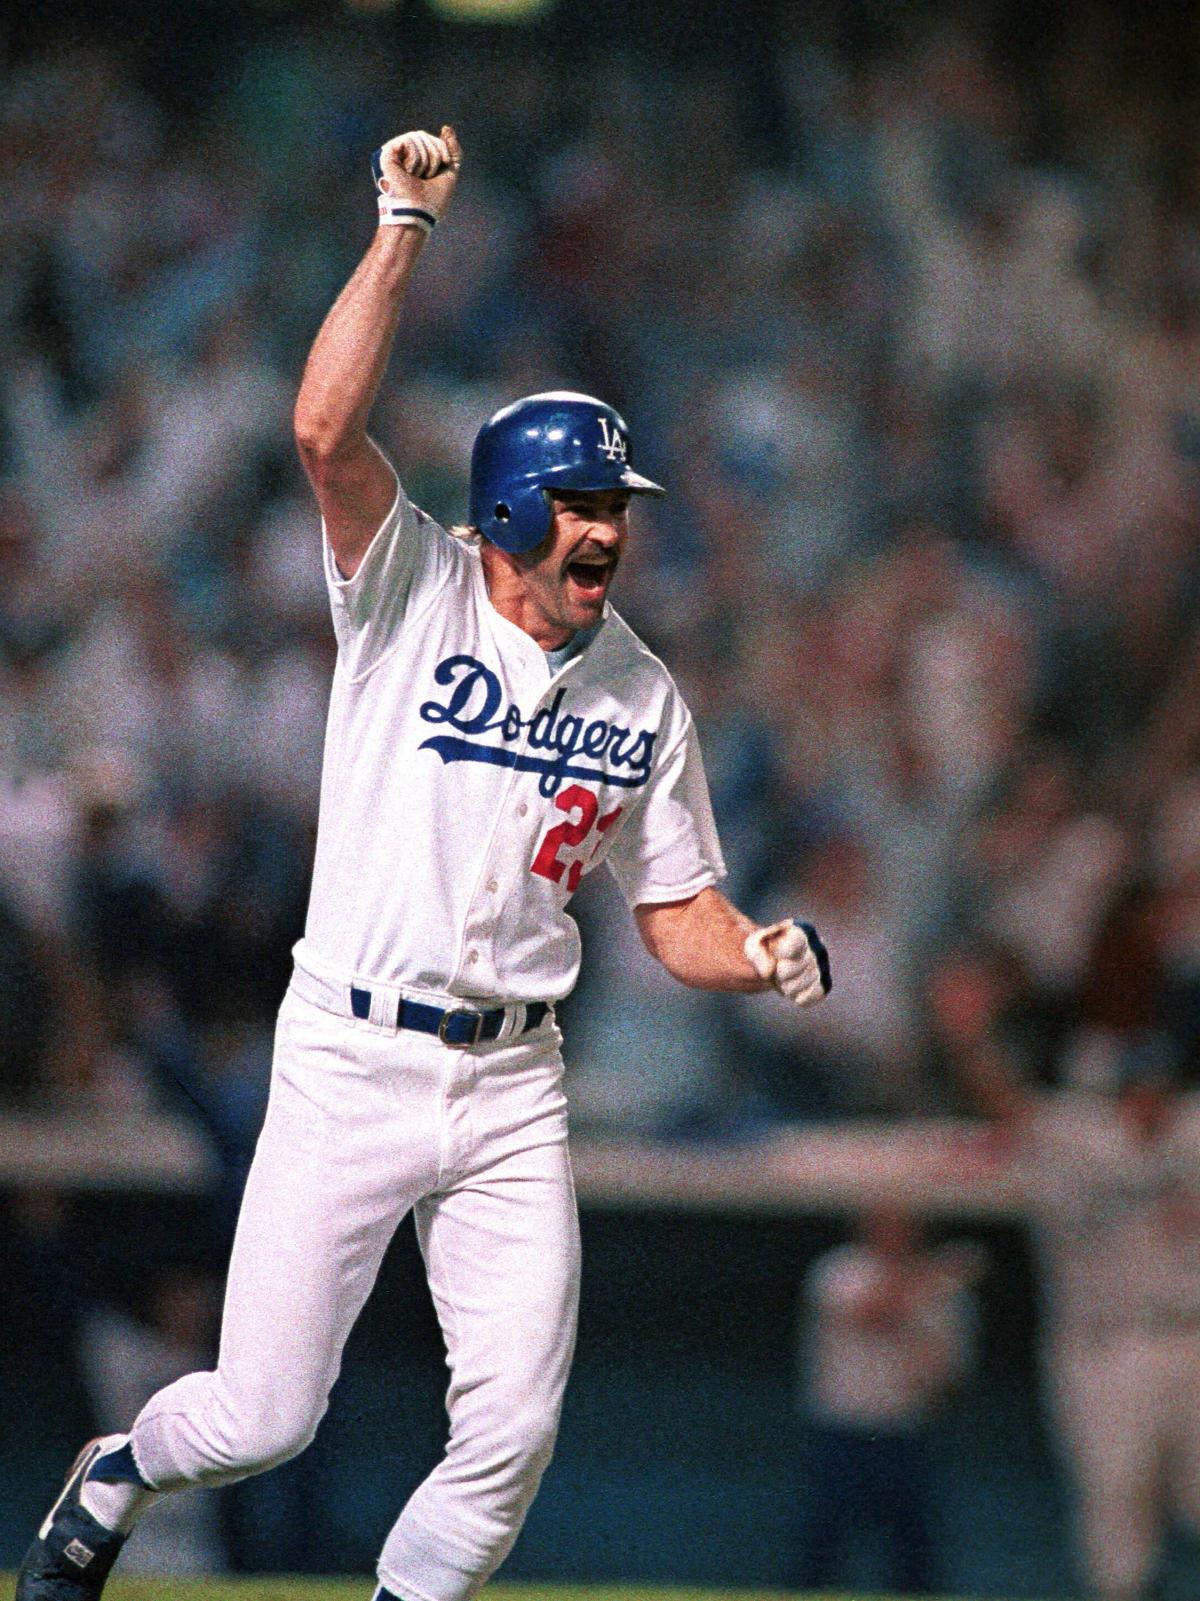 WS1988 Gm1: Scully's call of Gibson memorable at-bat 